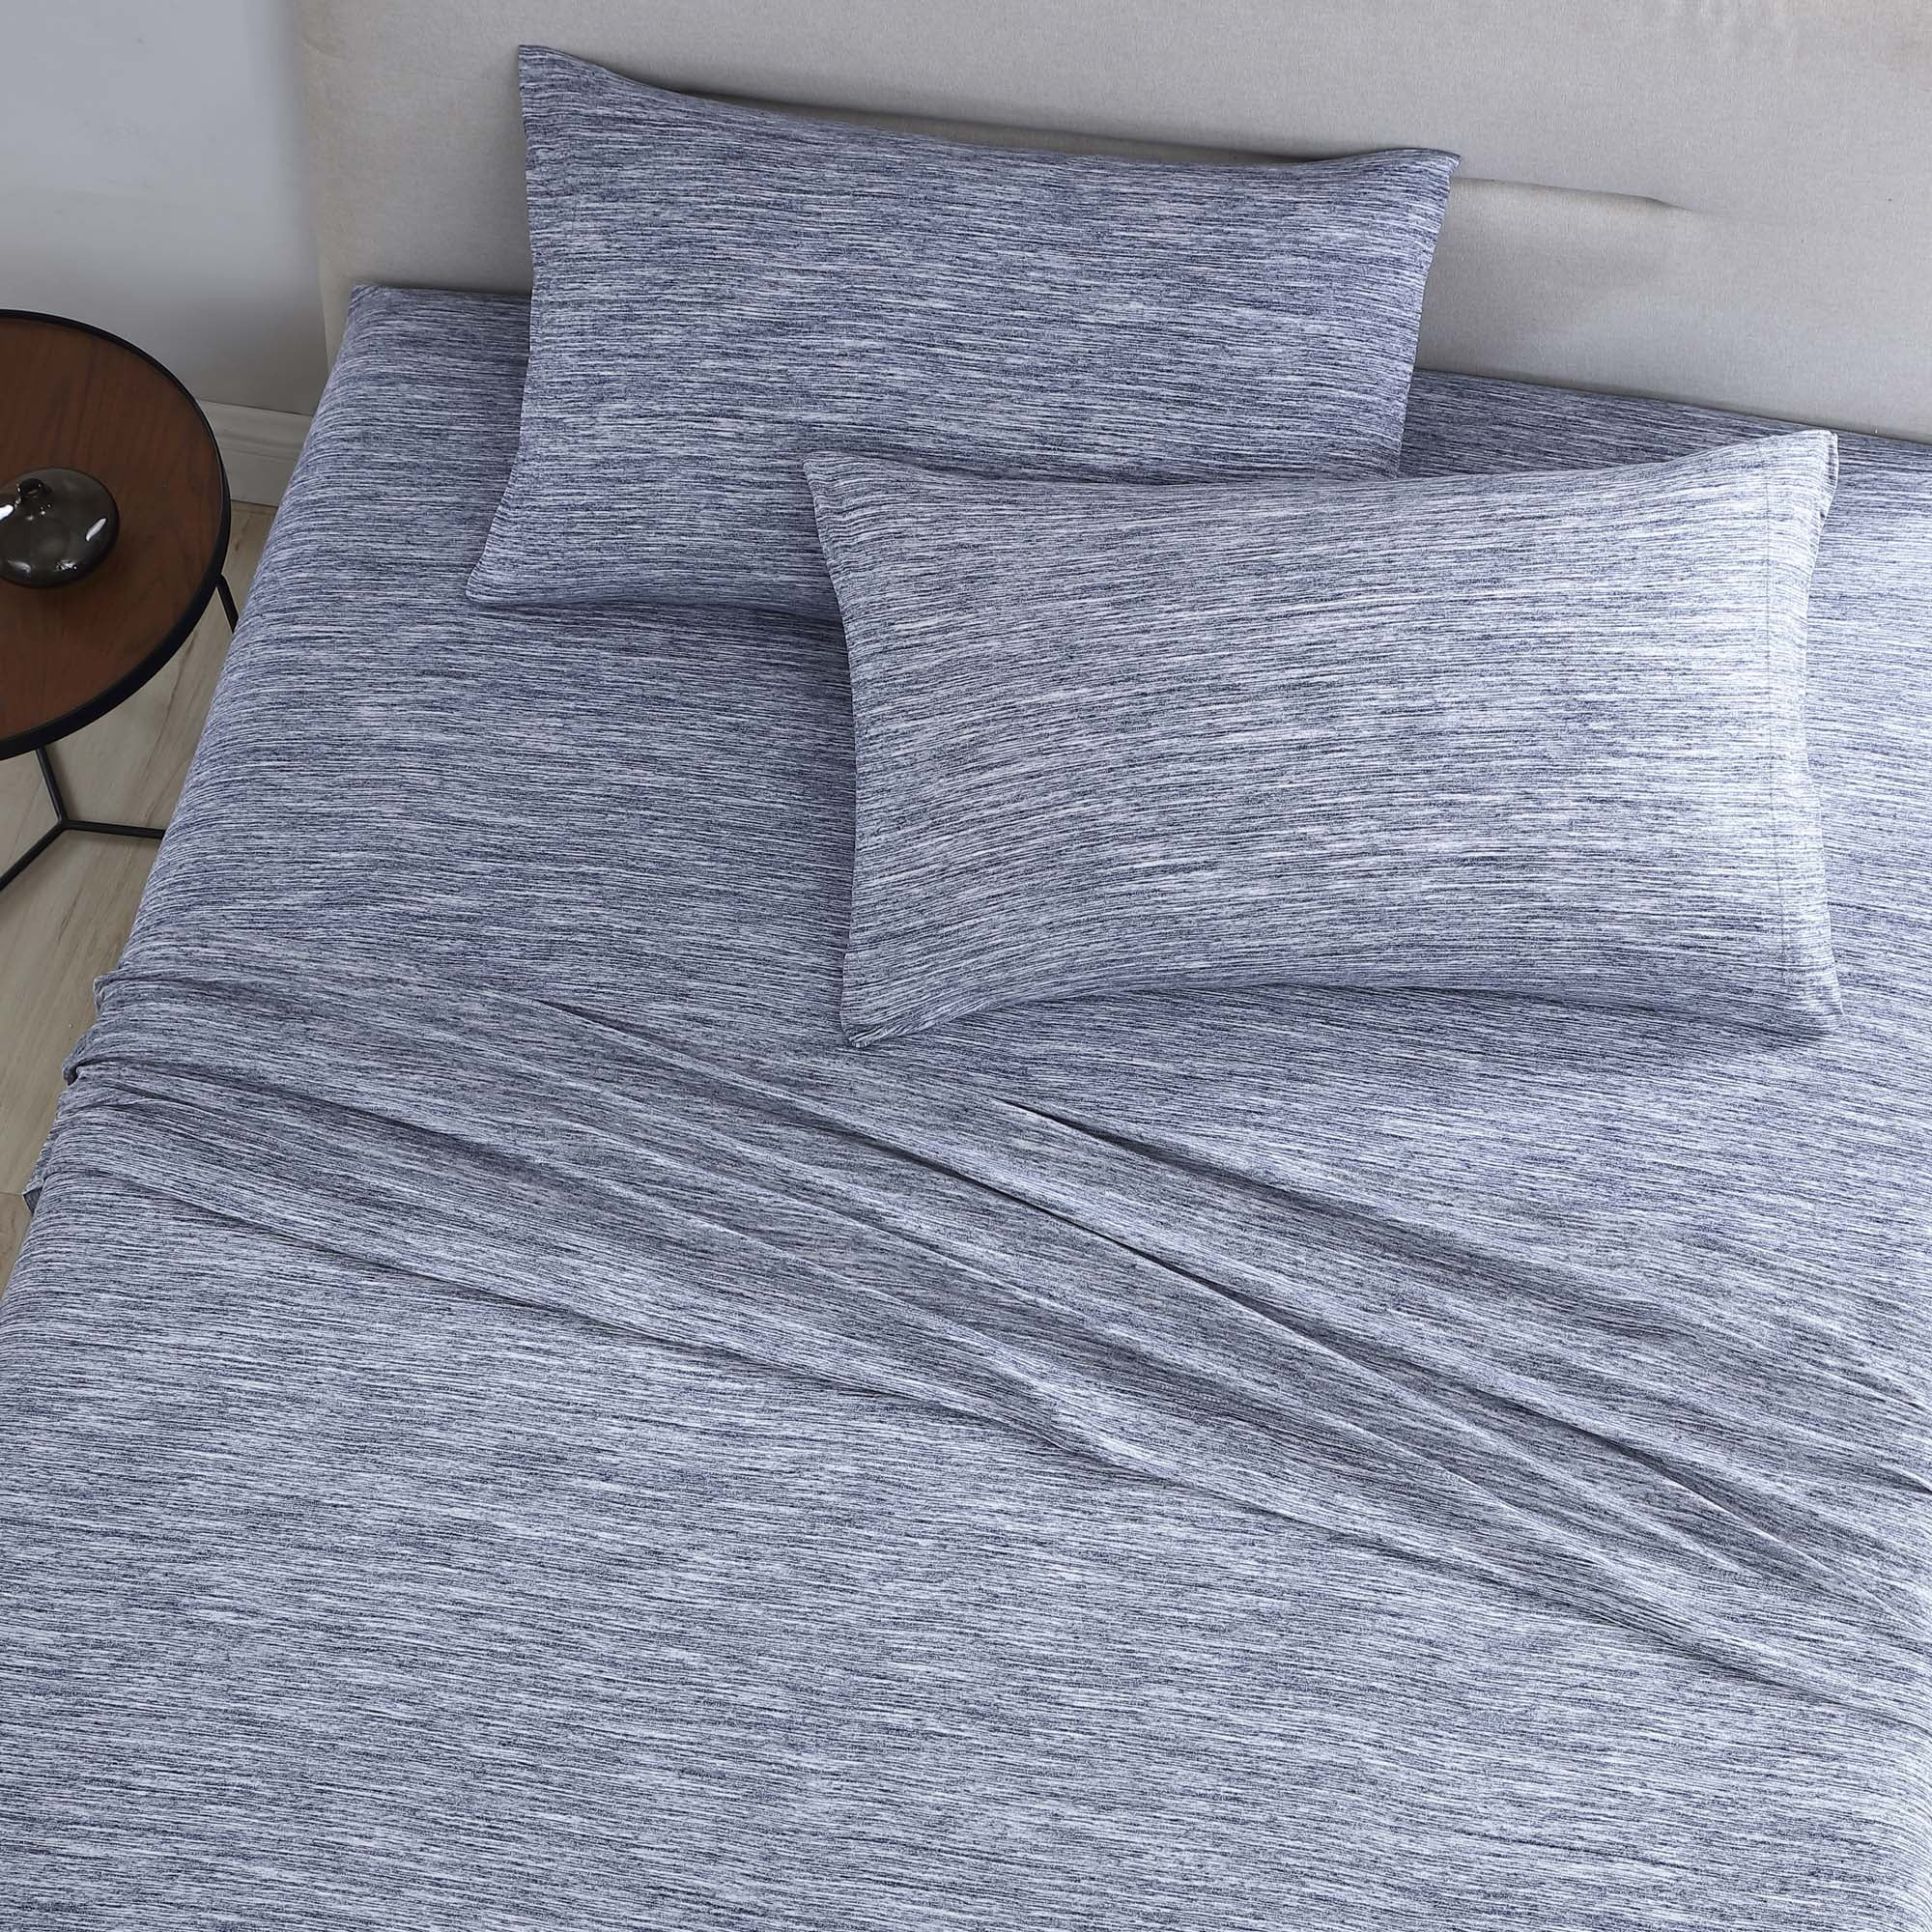 Jersey Knit Cotton Fitted Sheet Soft Breathable Jersey T-Shirt Soft Sheet Set 